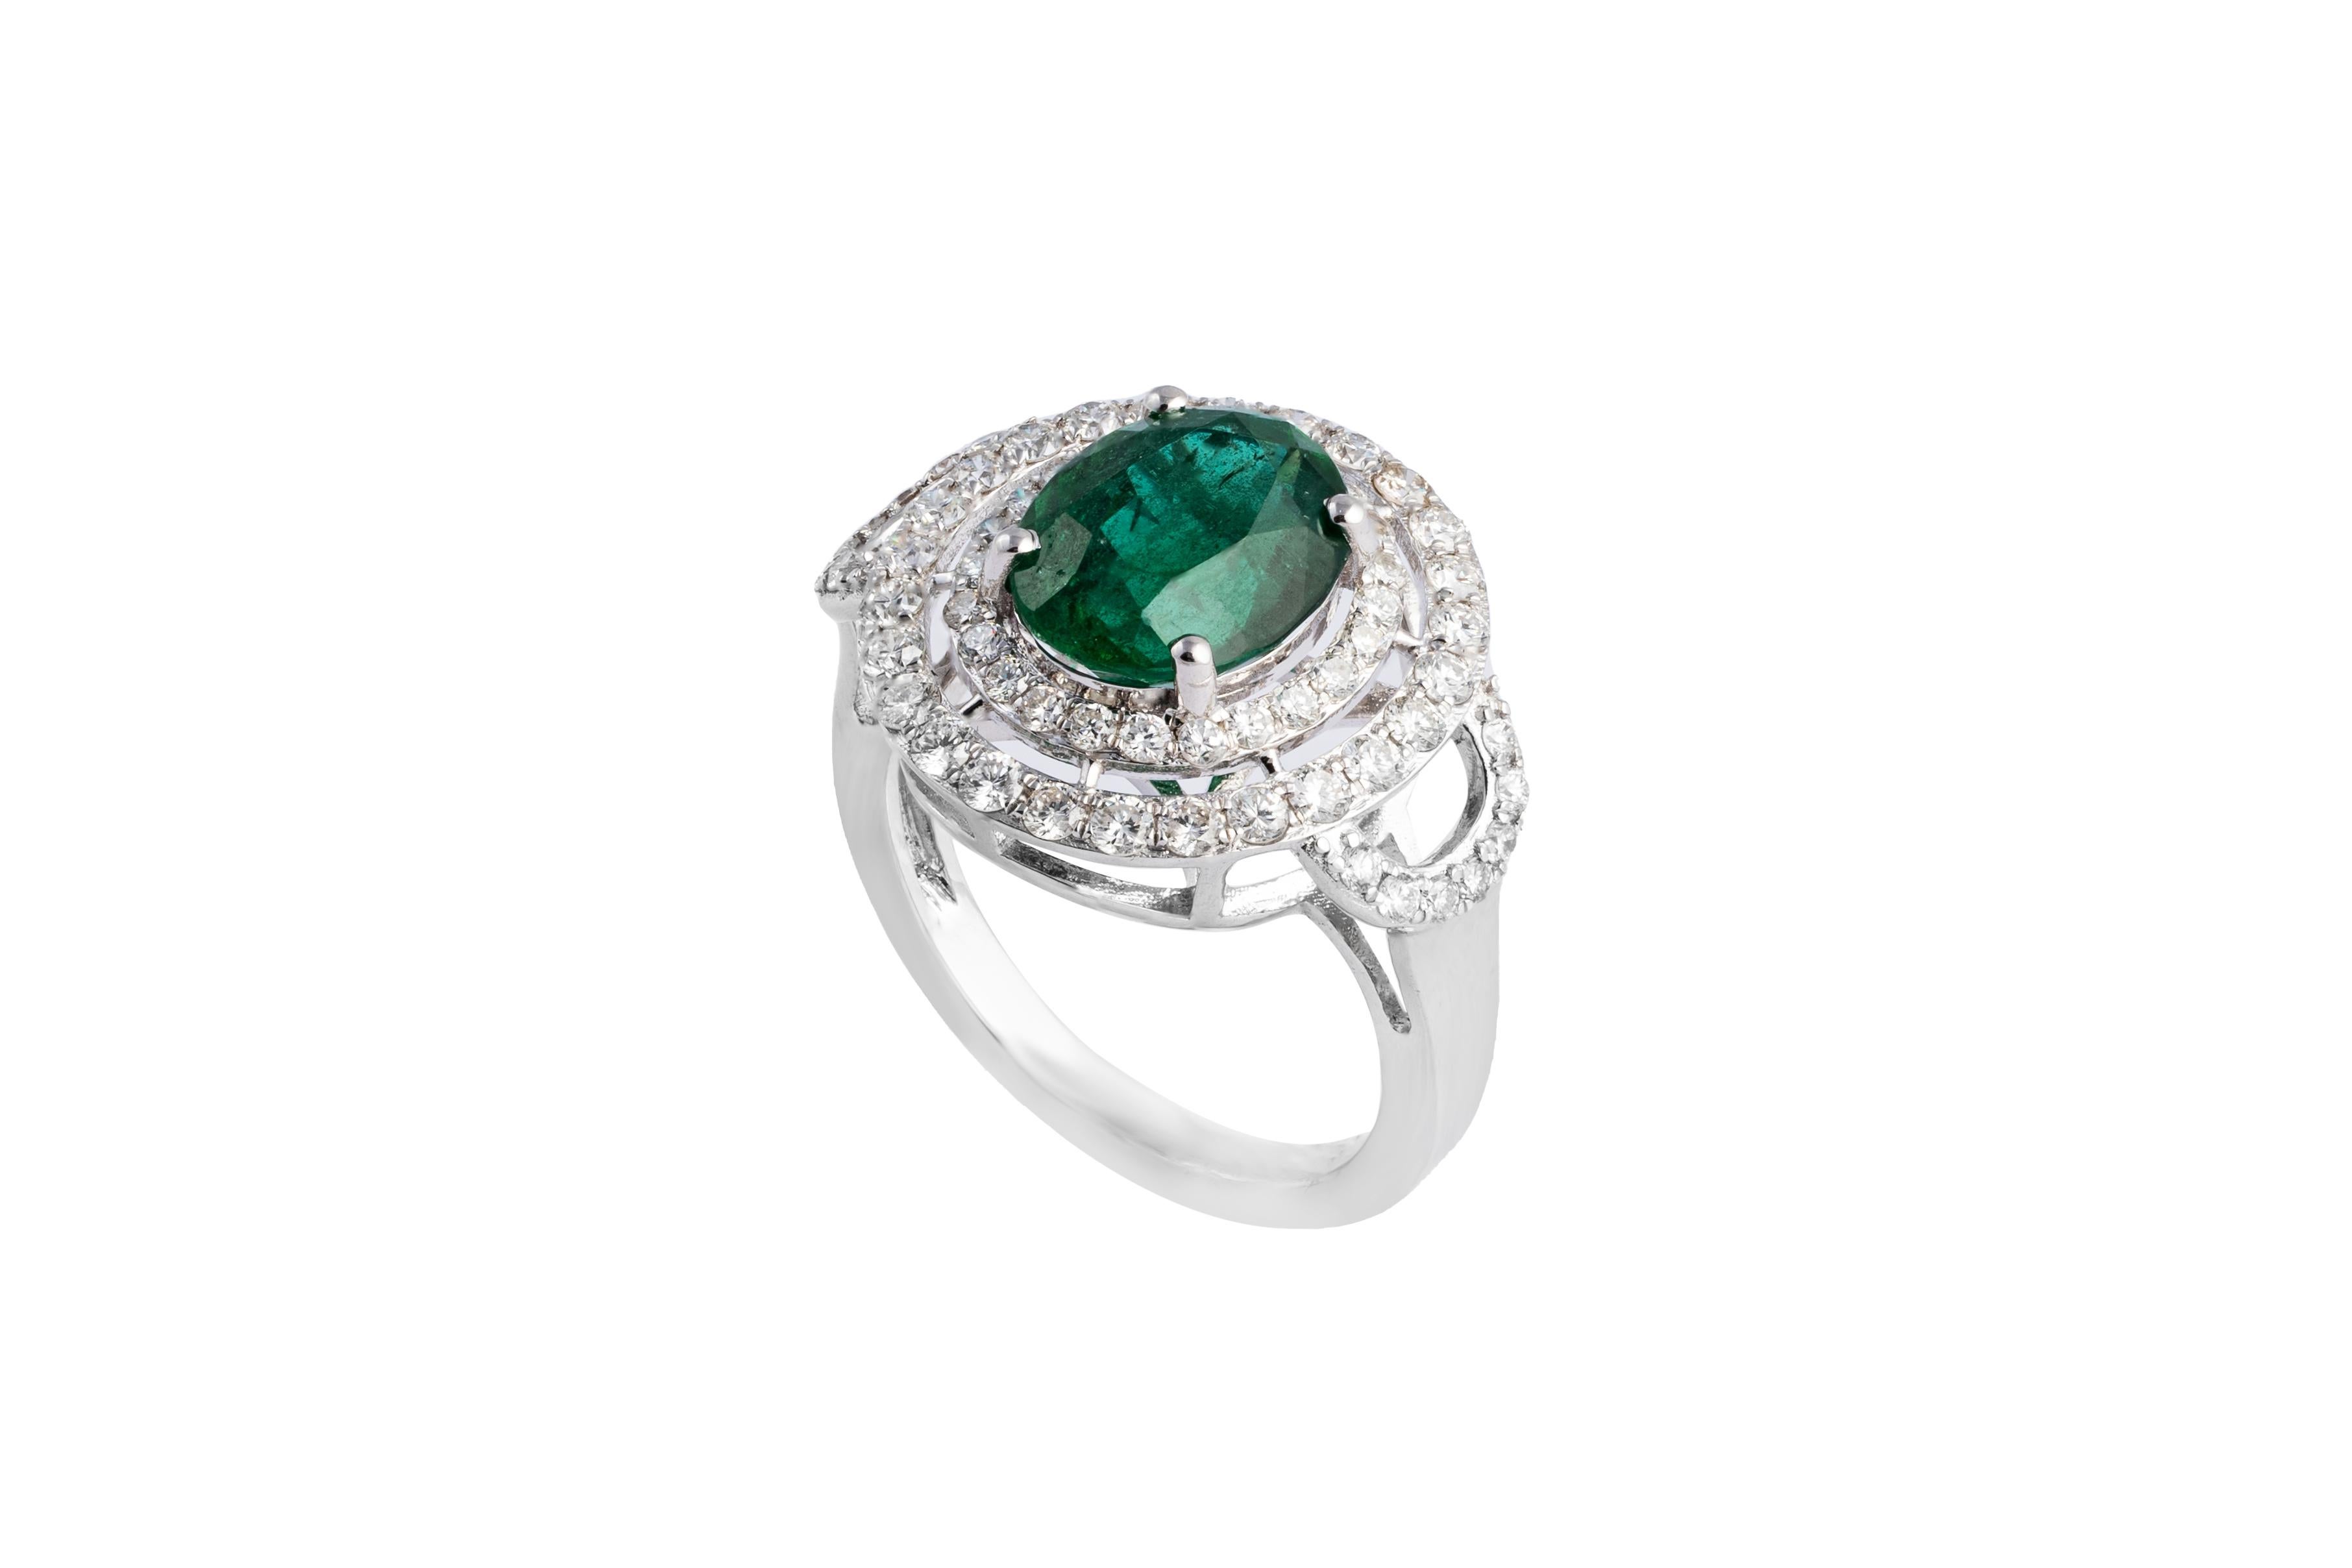 this is an awesome natural Zambian Emerald ring . Emeralds are of very high quality and diamonds are very good with vsi clarity and G colour.

emeralds: 3.36 cts
diamonds : 1.01
gold : 4.65 gms

very hard to capture the true color and luster of the